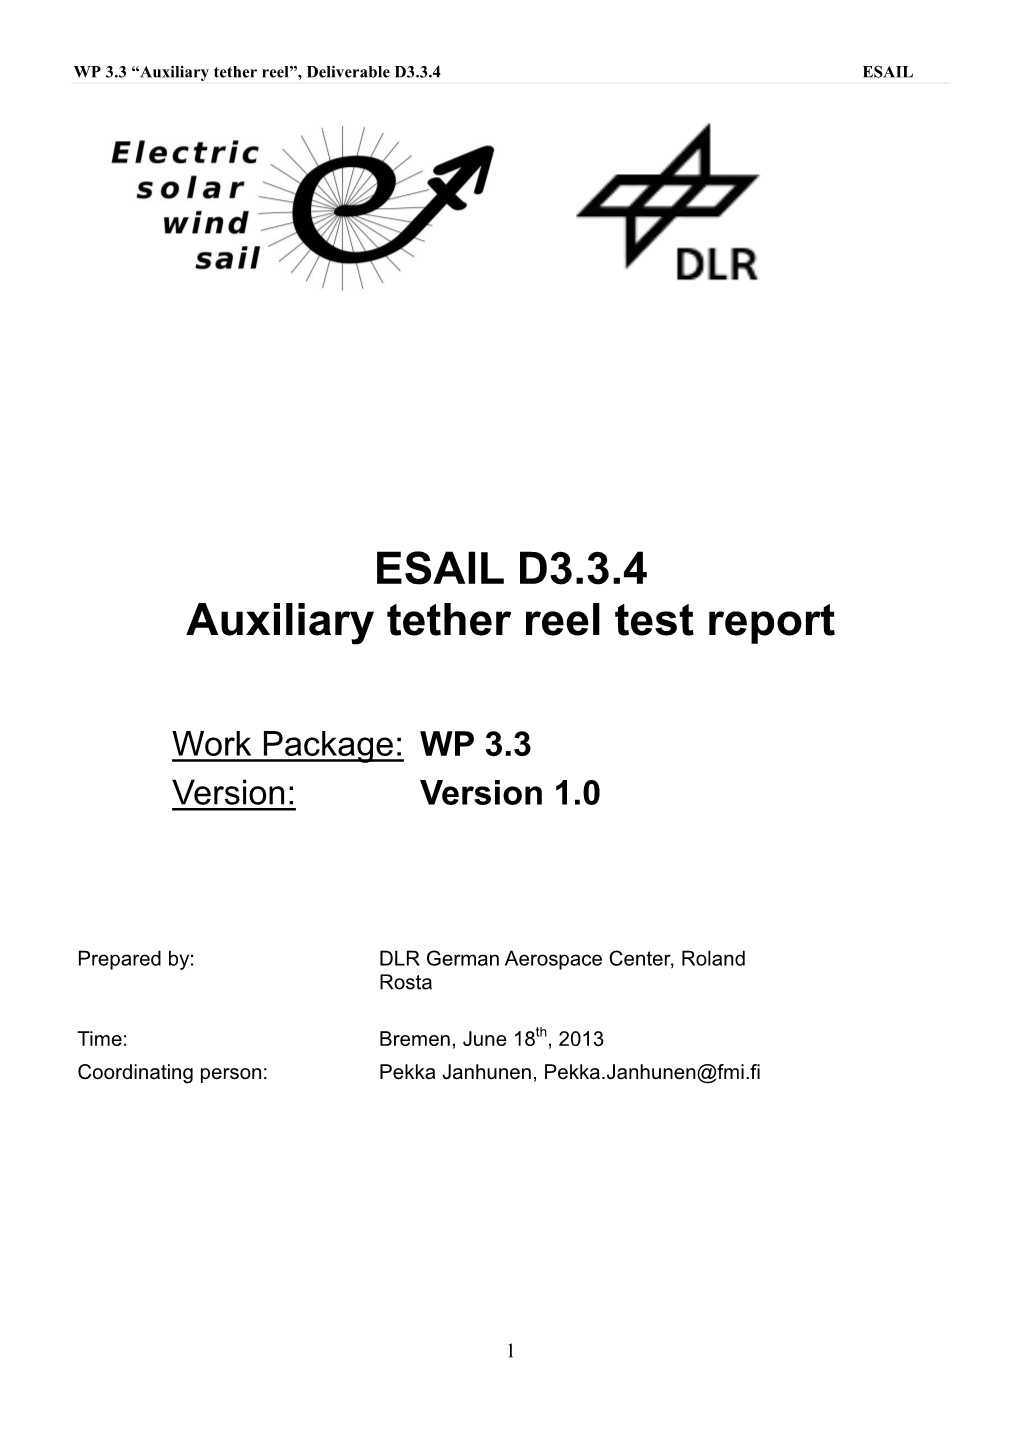 ESAIL D3.3.4 Auxiliary Tether Reel Test Report